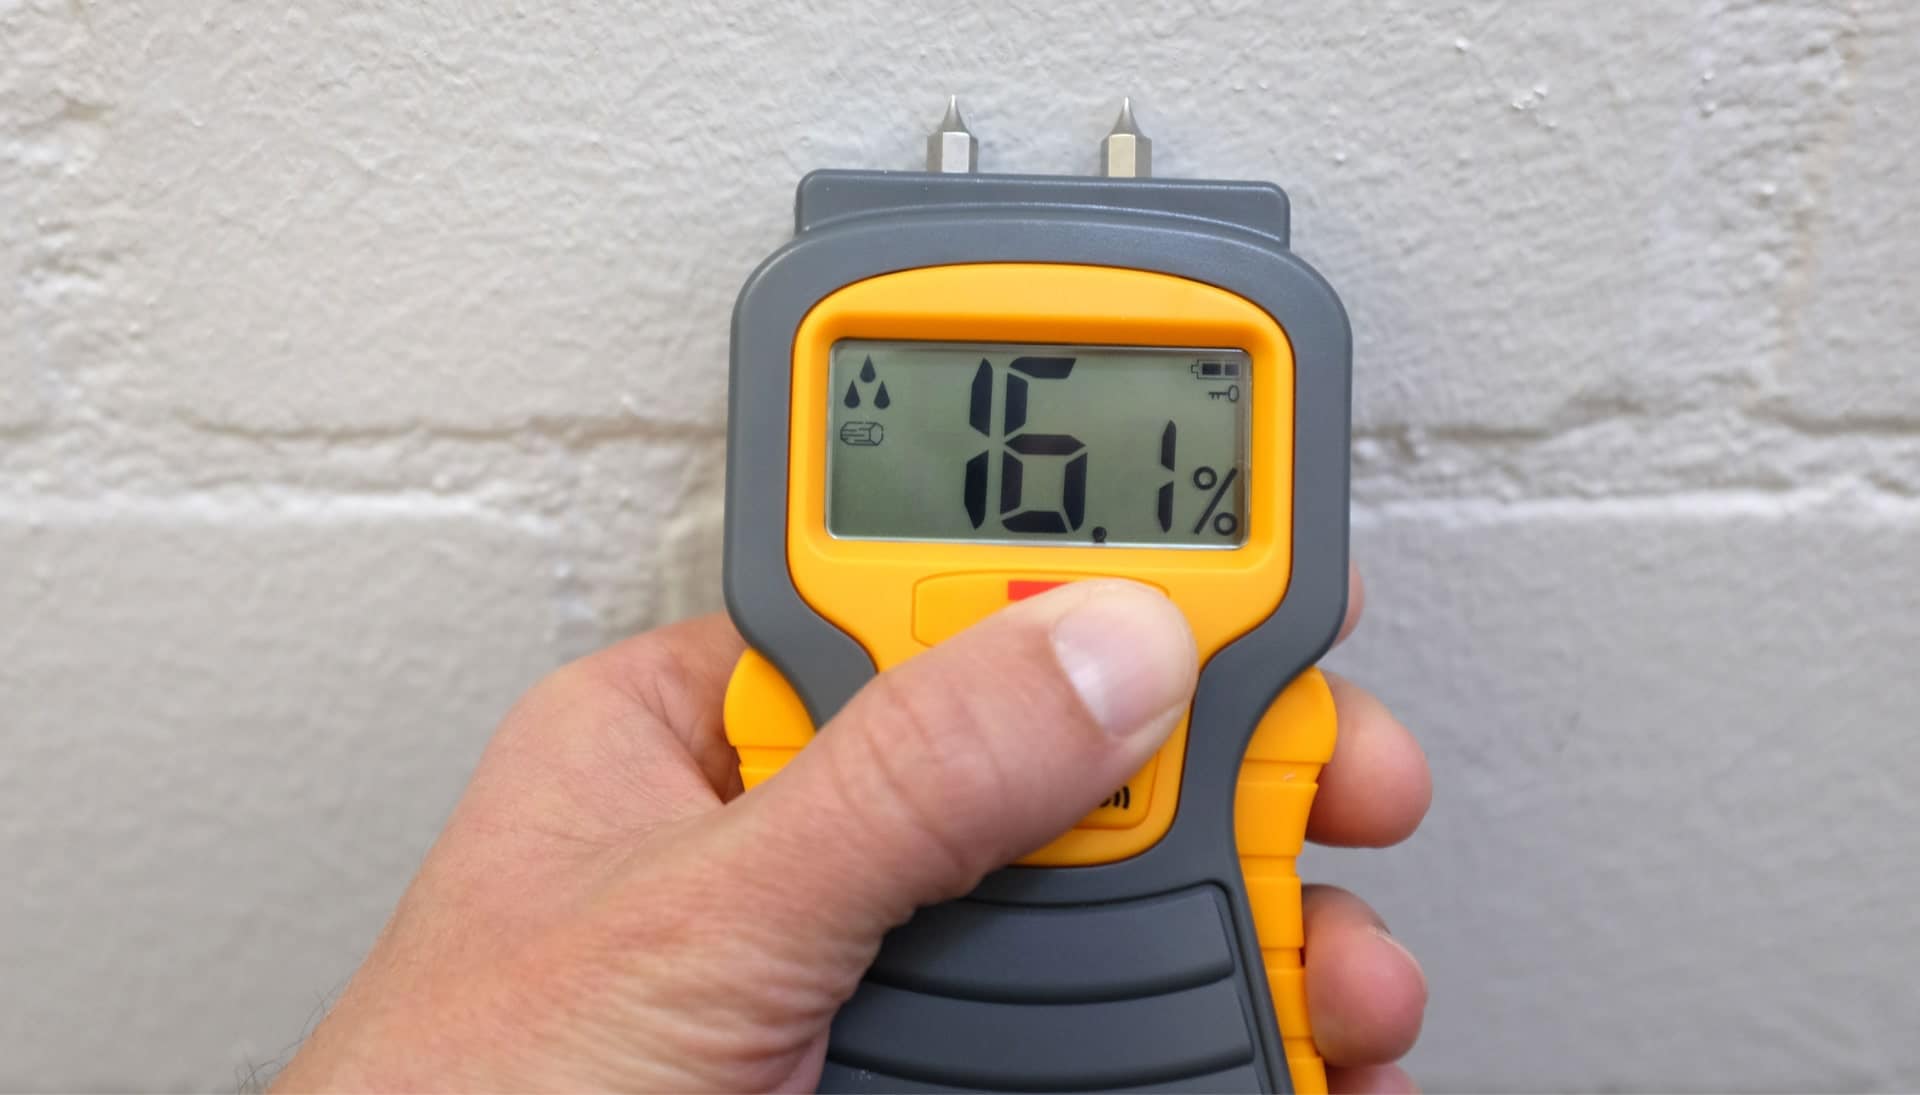 We provide fast, accurate, and affordable mold testing services in Lexington, Kentucky.